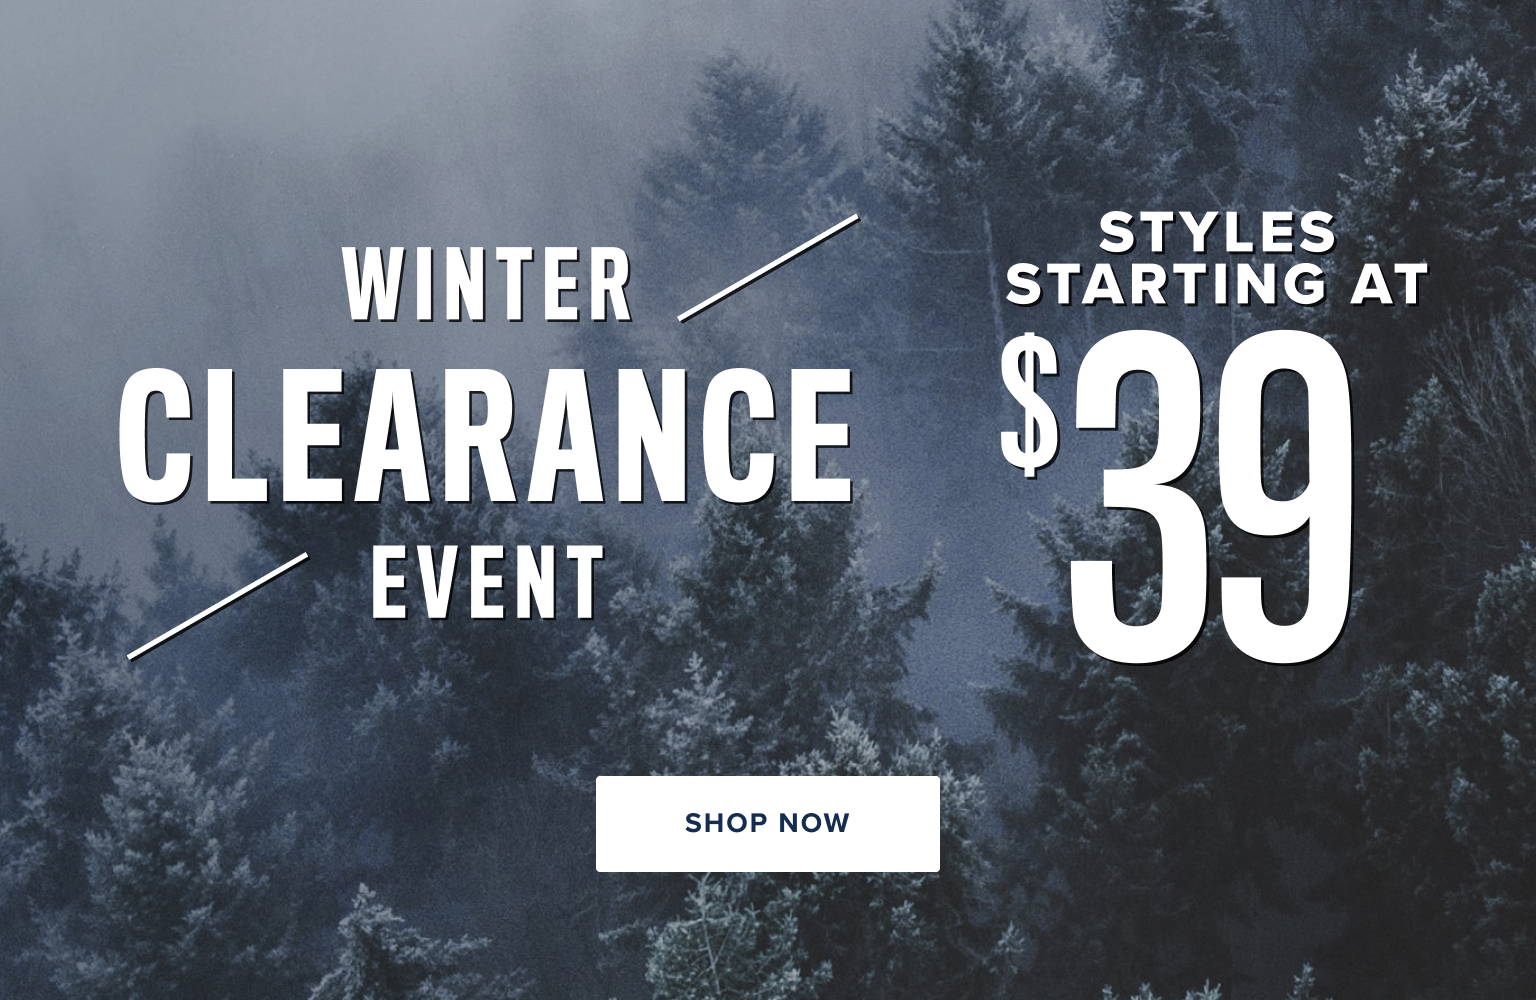 Winter Clearance Event Styles Starting at $39